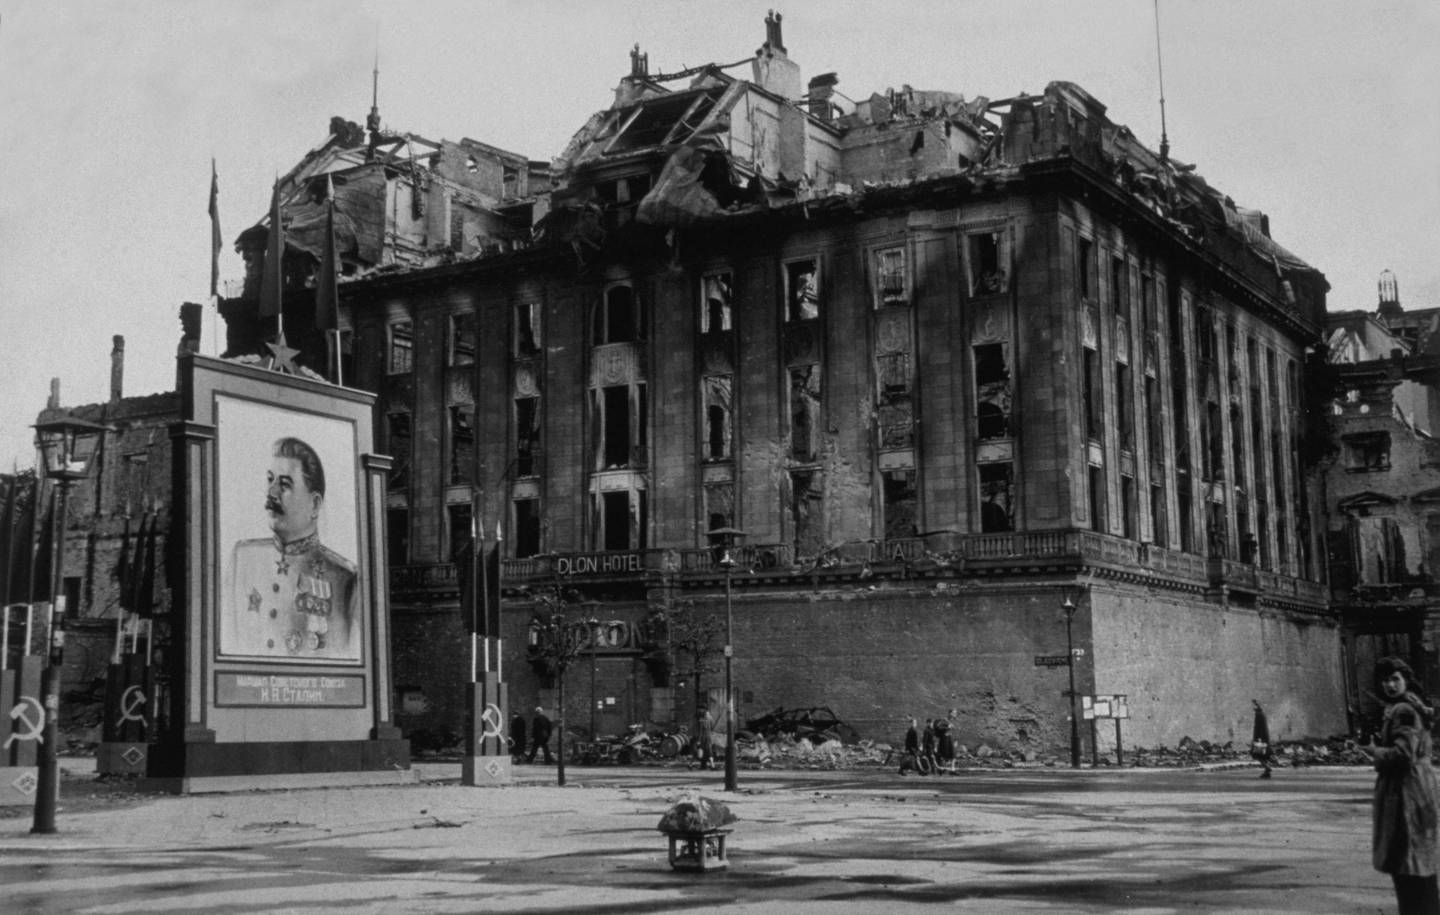 The damaged Adlon Hotel on the Unter Den Linden in Berlin, next to a vast picture of Stalin erected by the Russians in 1945. Photograph: Getty